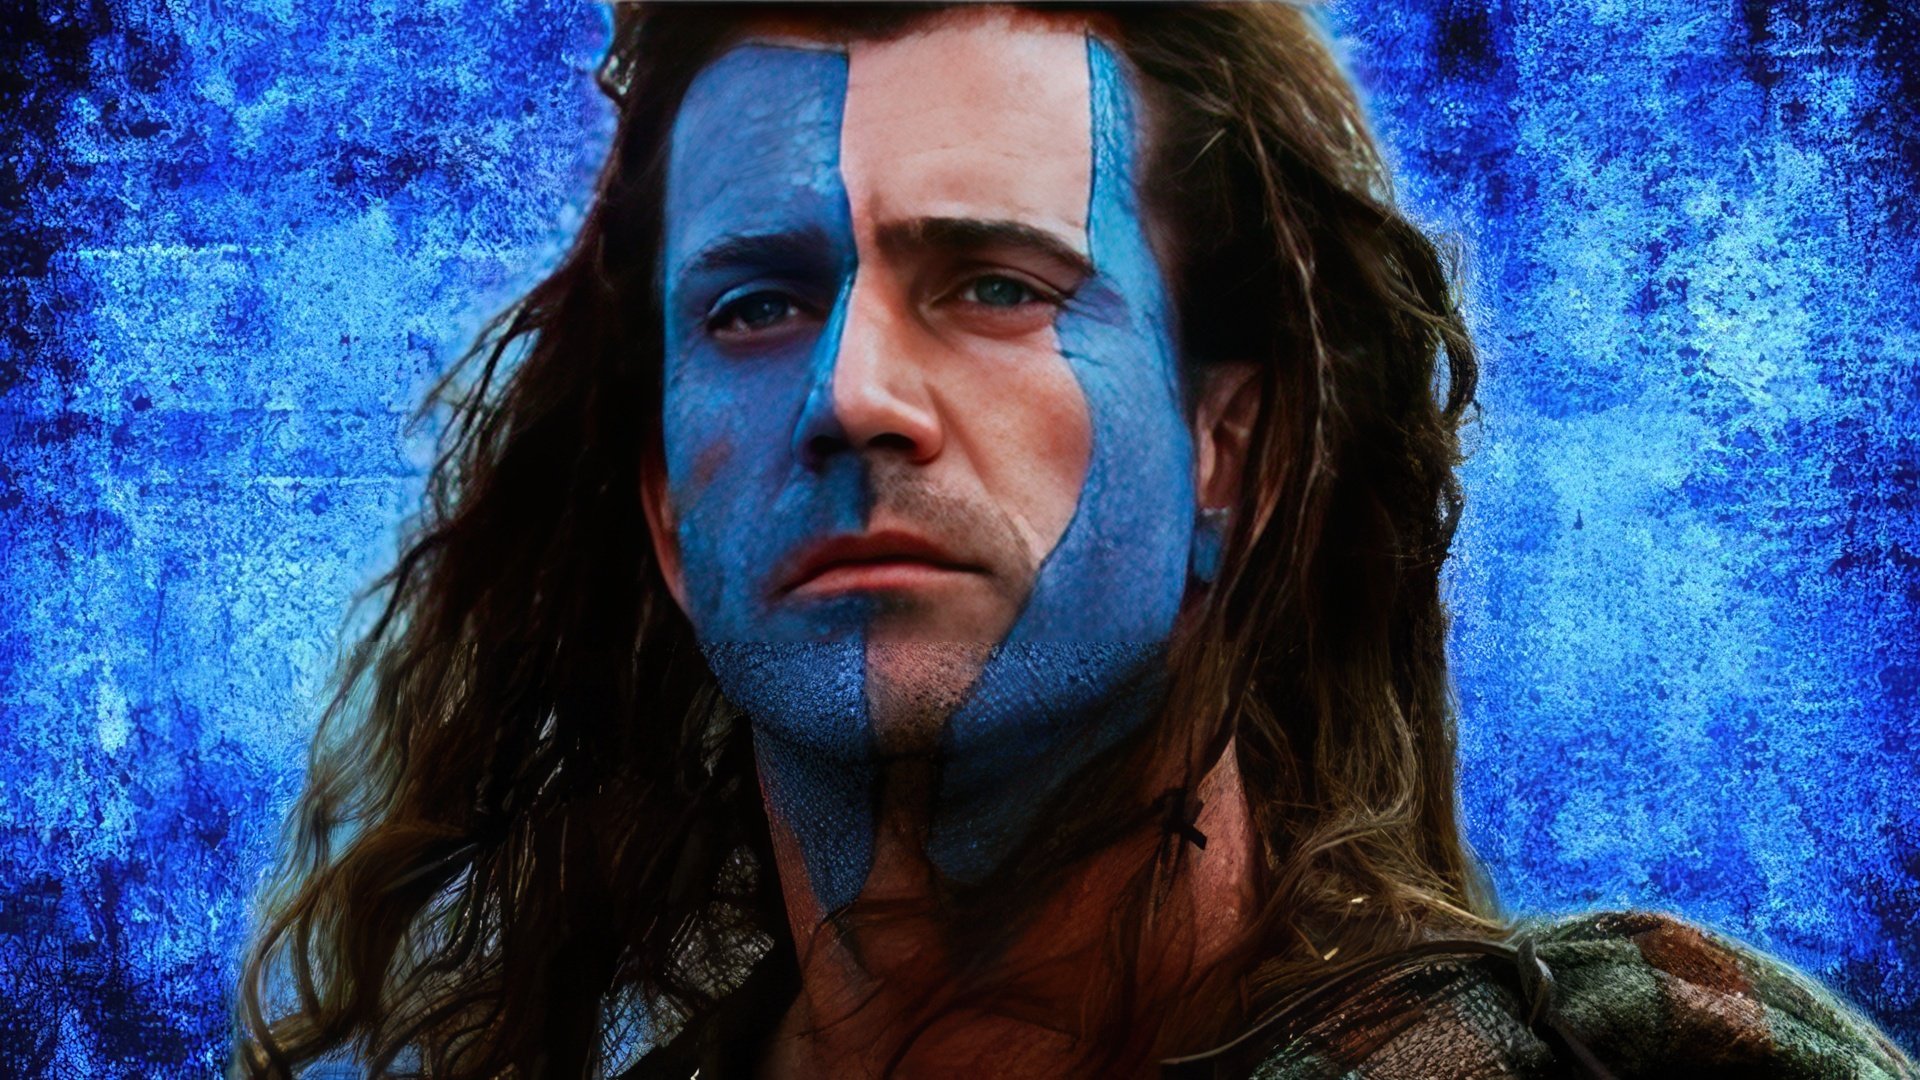 Mel Gibson in the movie Braveheart